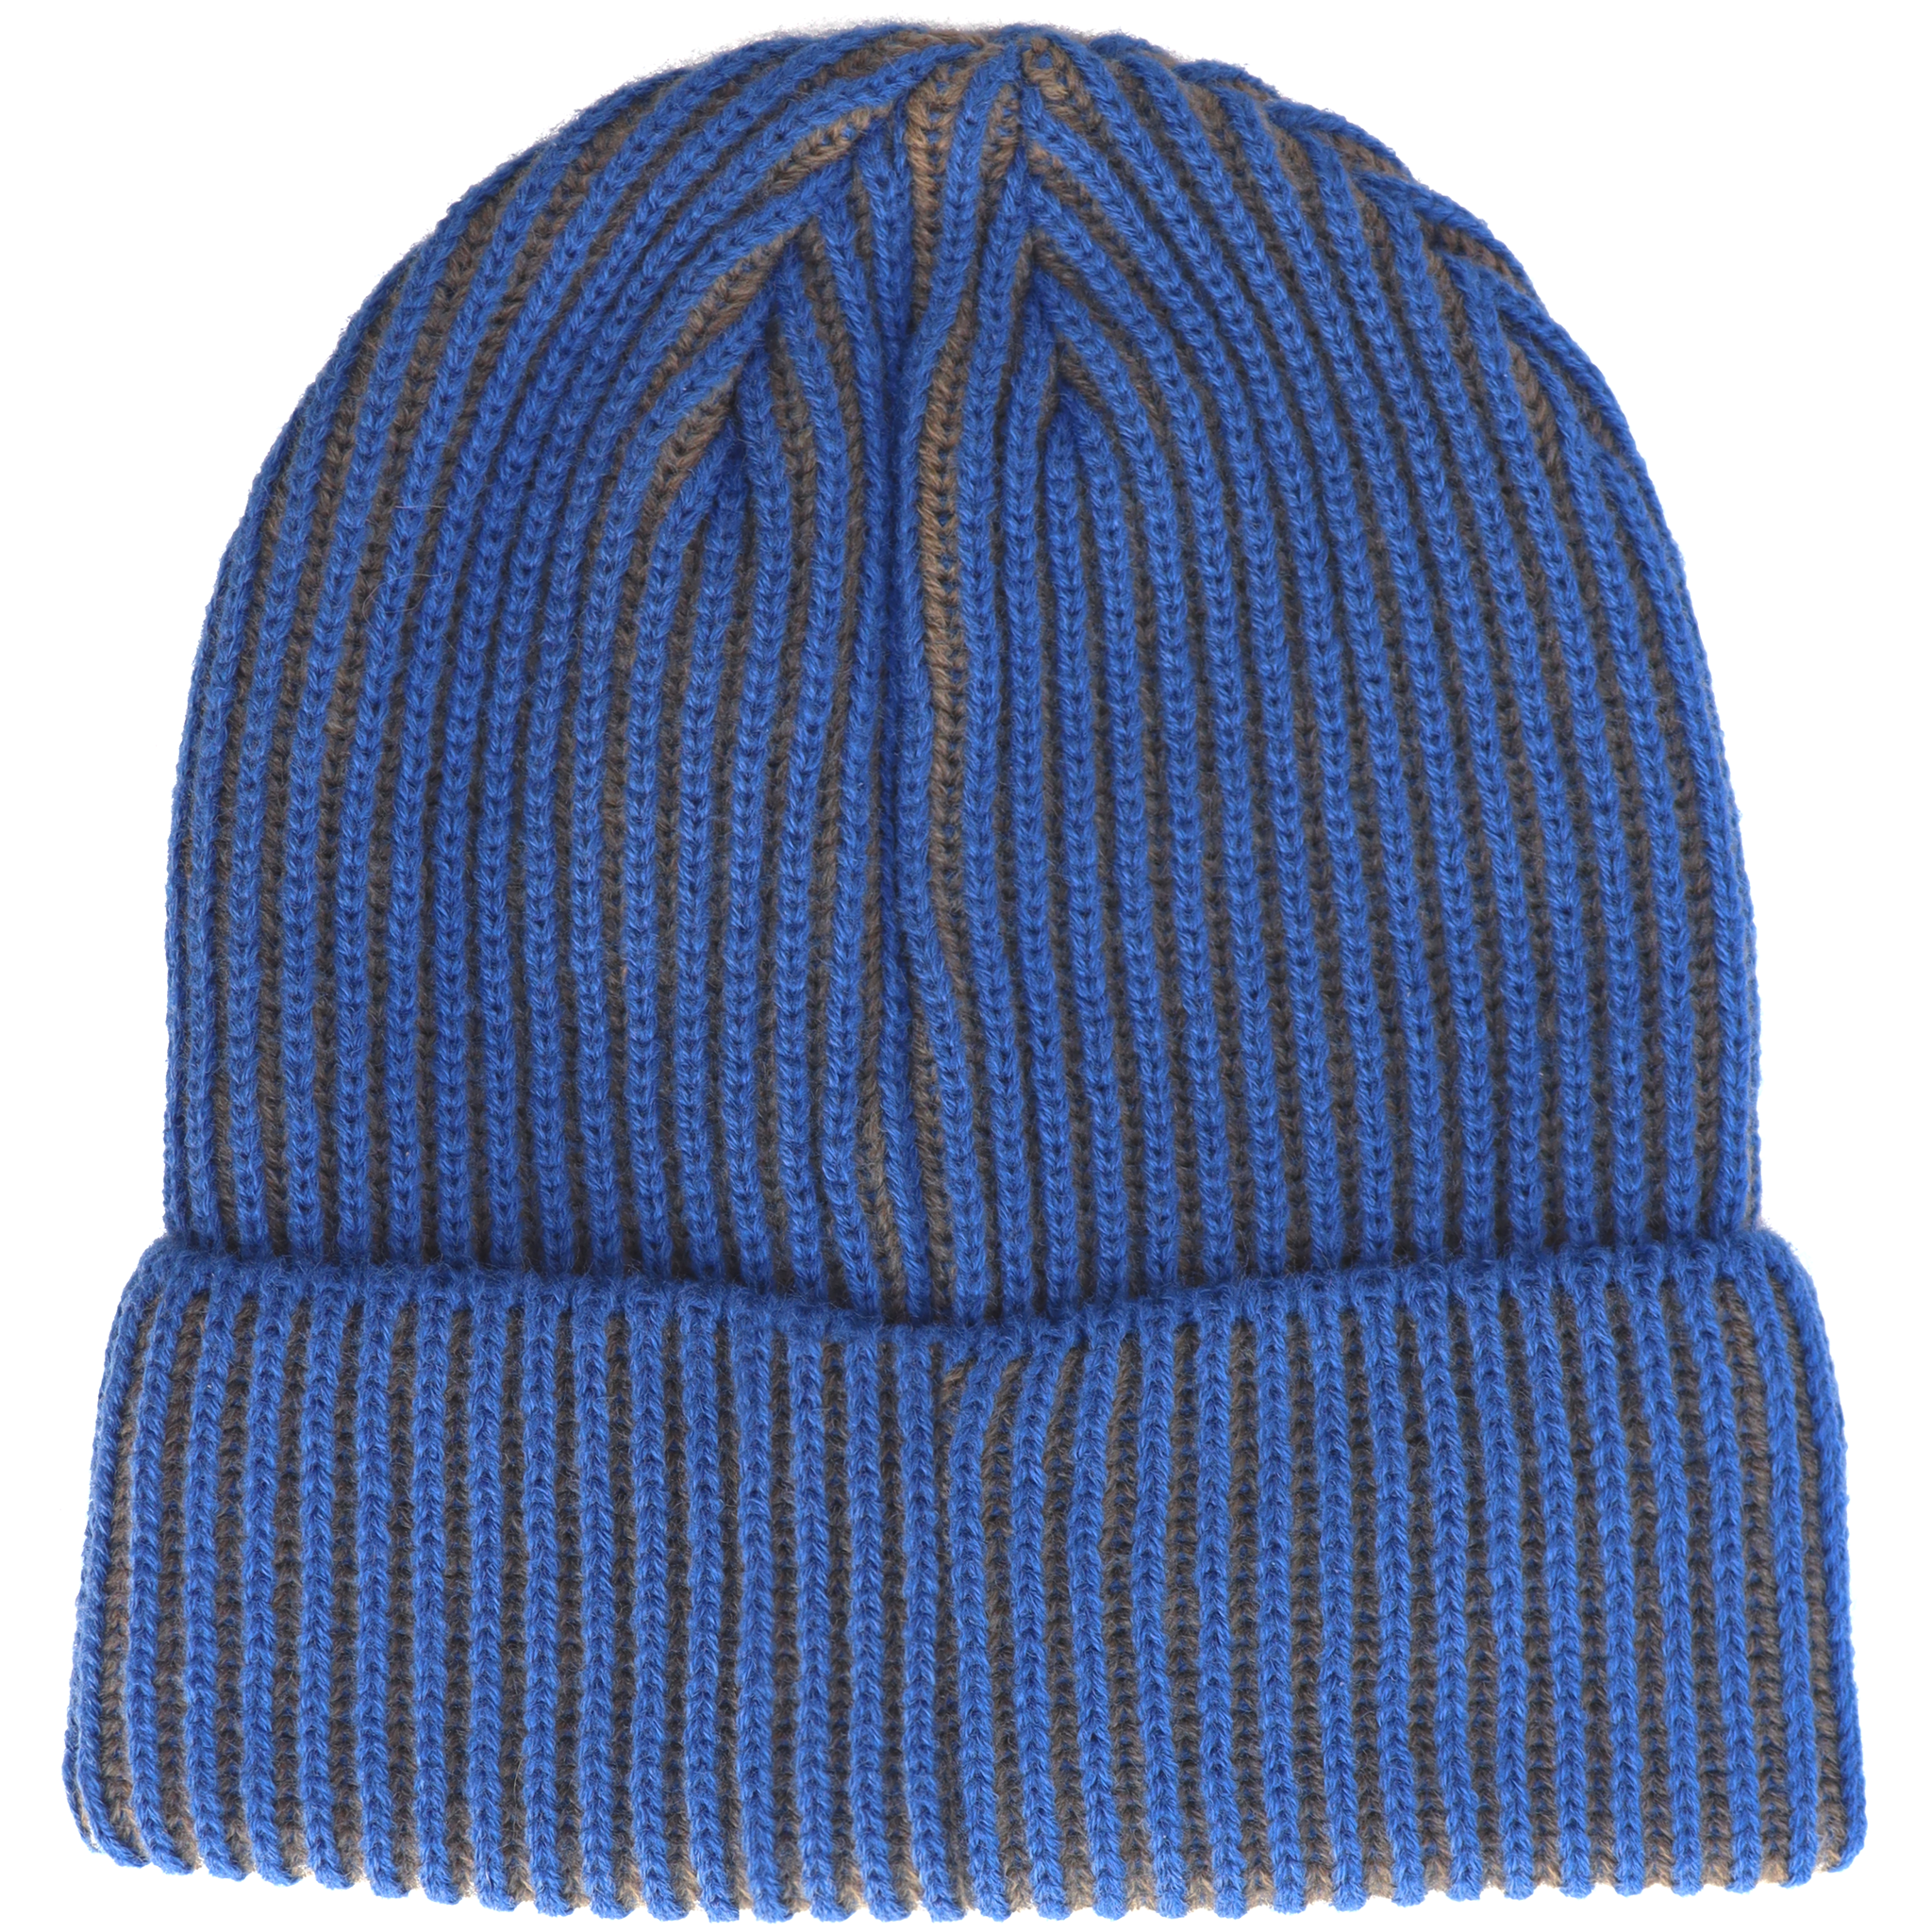 Beanie hii-def – Two-Toned Patch Rubber